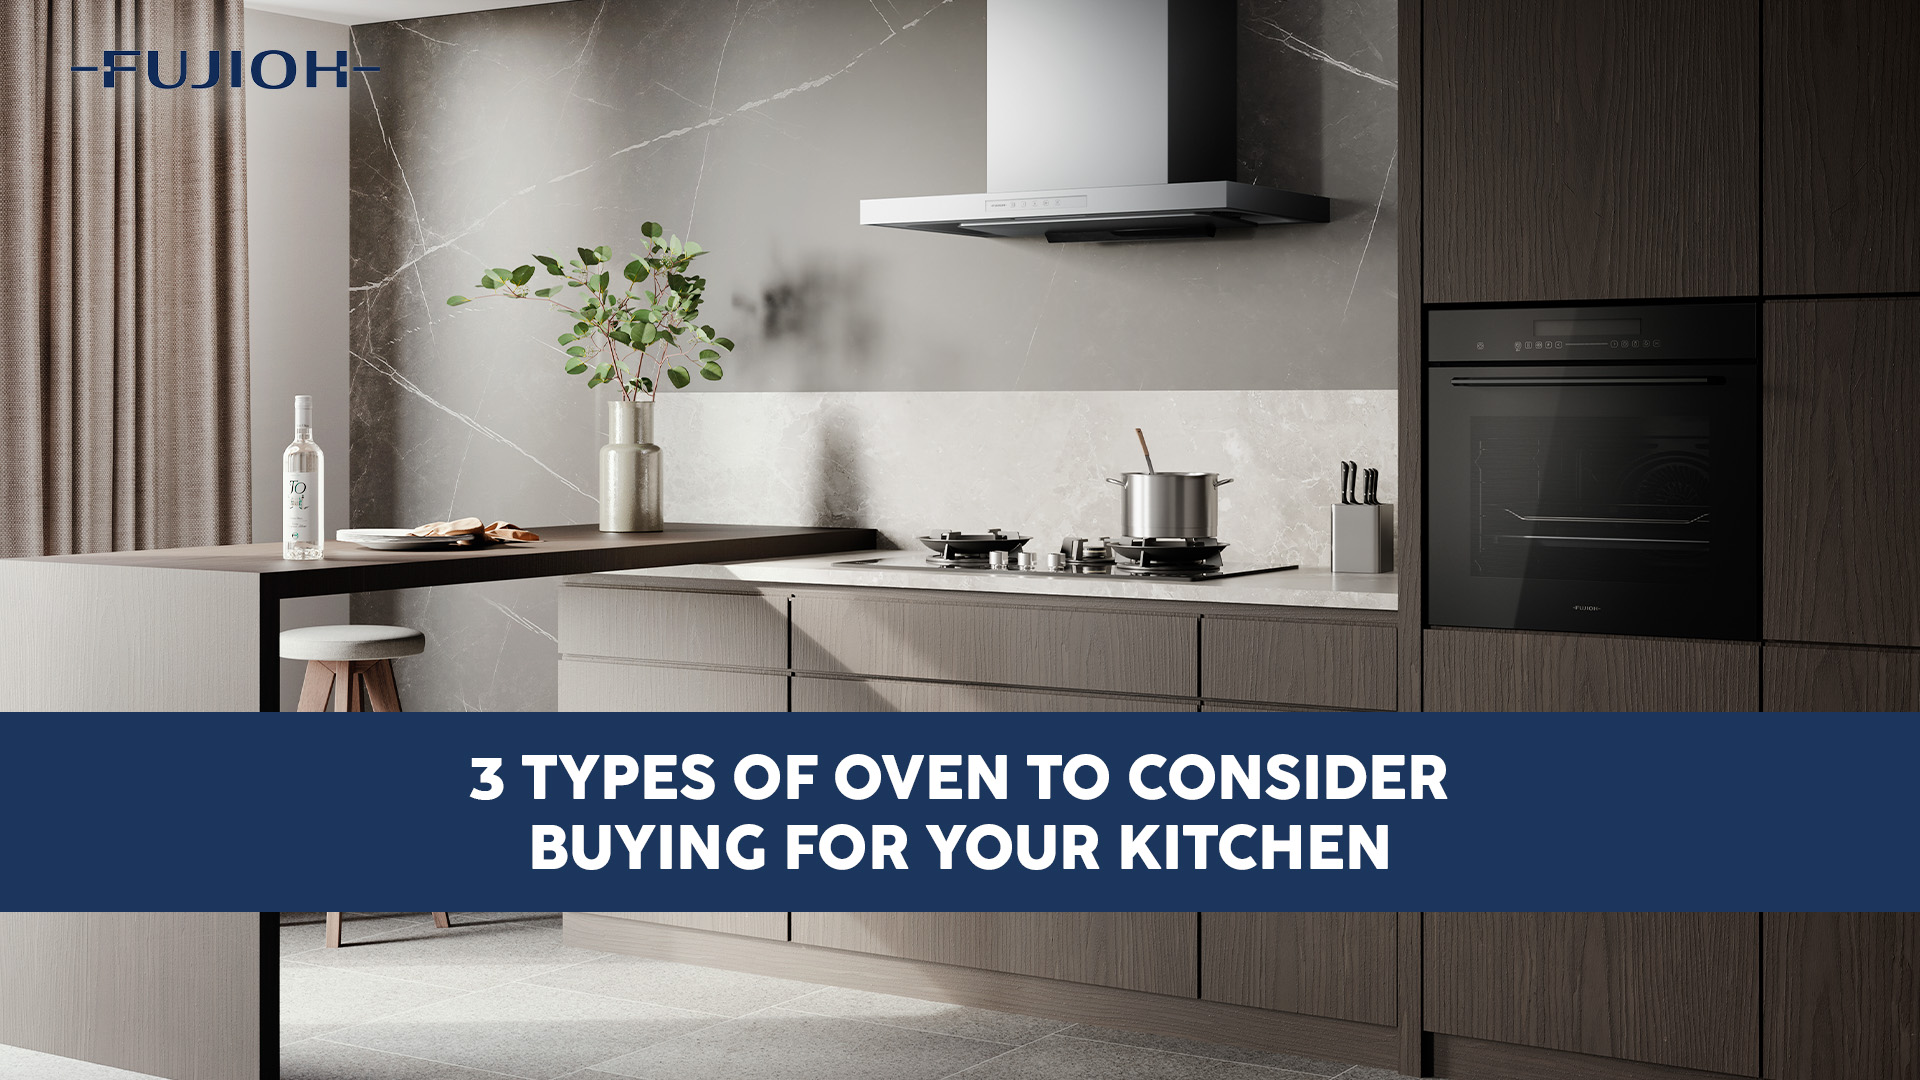 3 Types of Ovens to Consider Buying for Your Kitchen